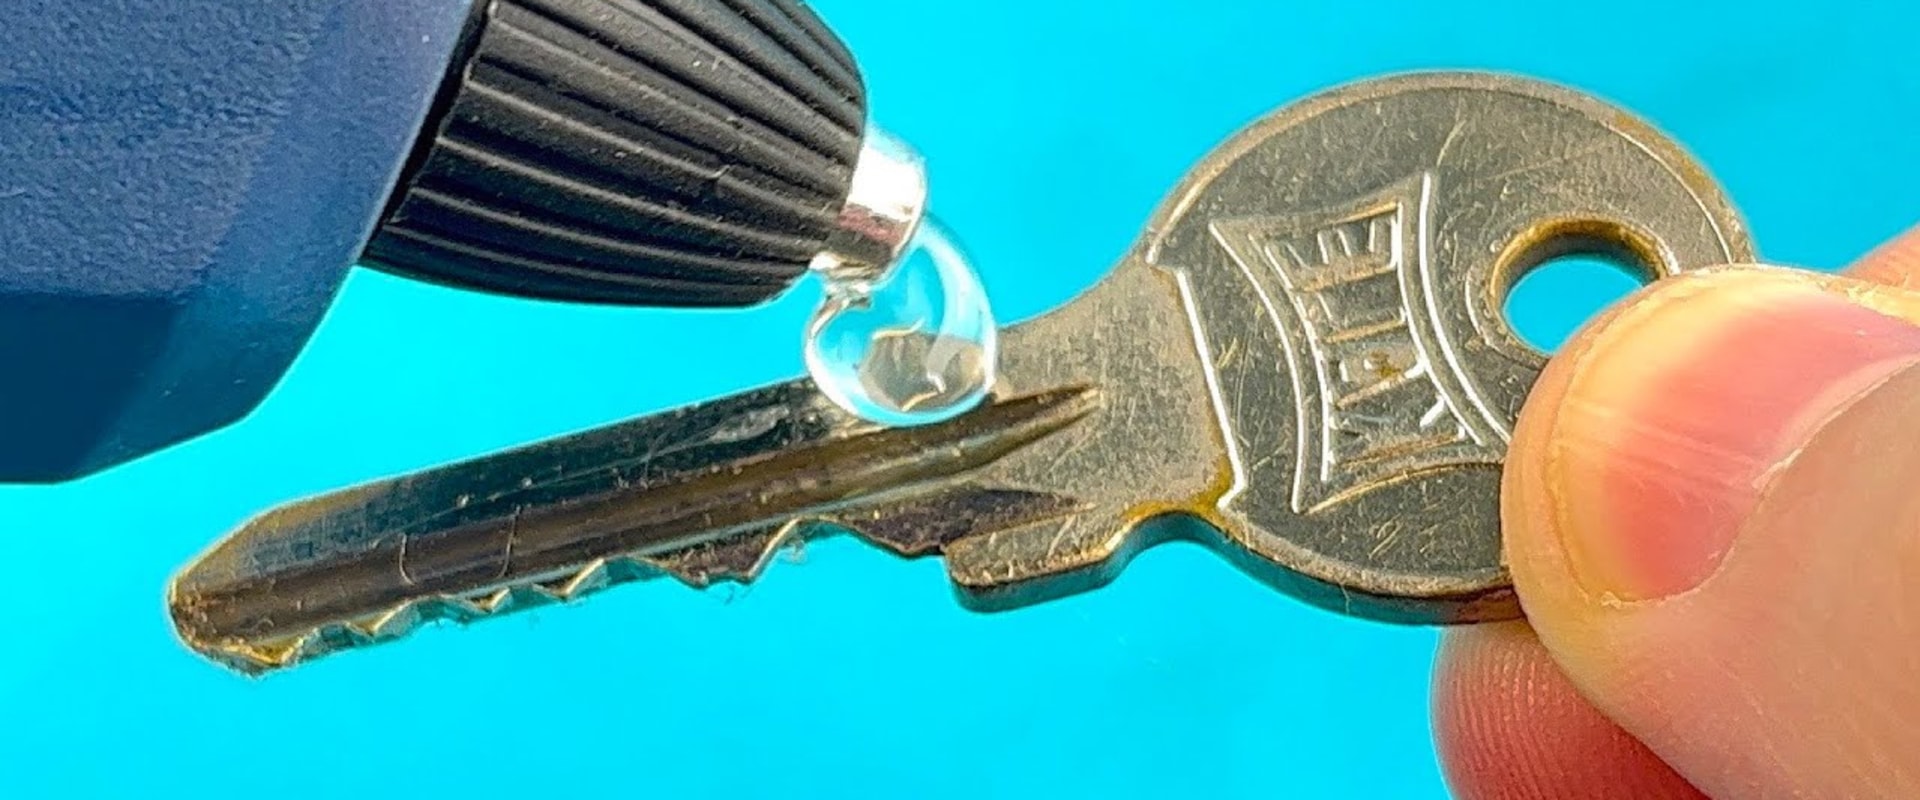 The Art of Crafting a Key from a Lock